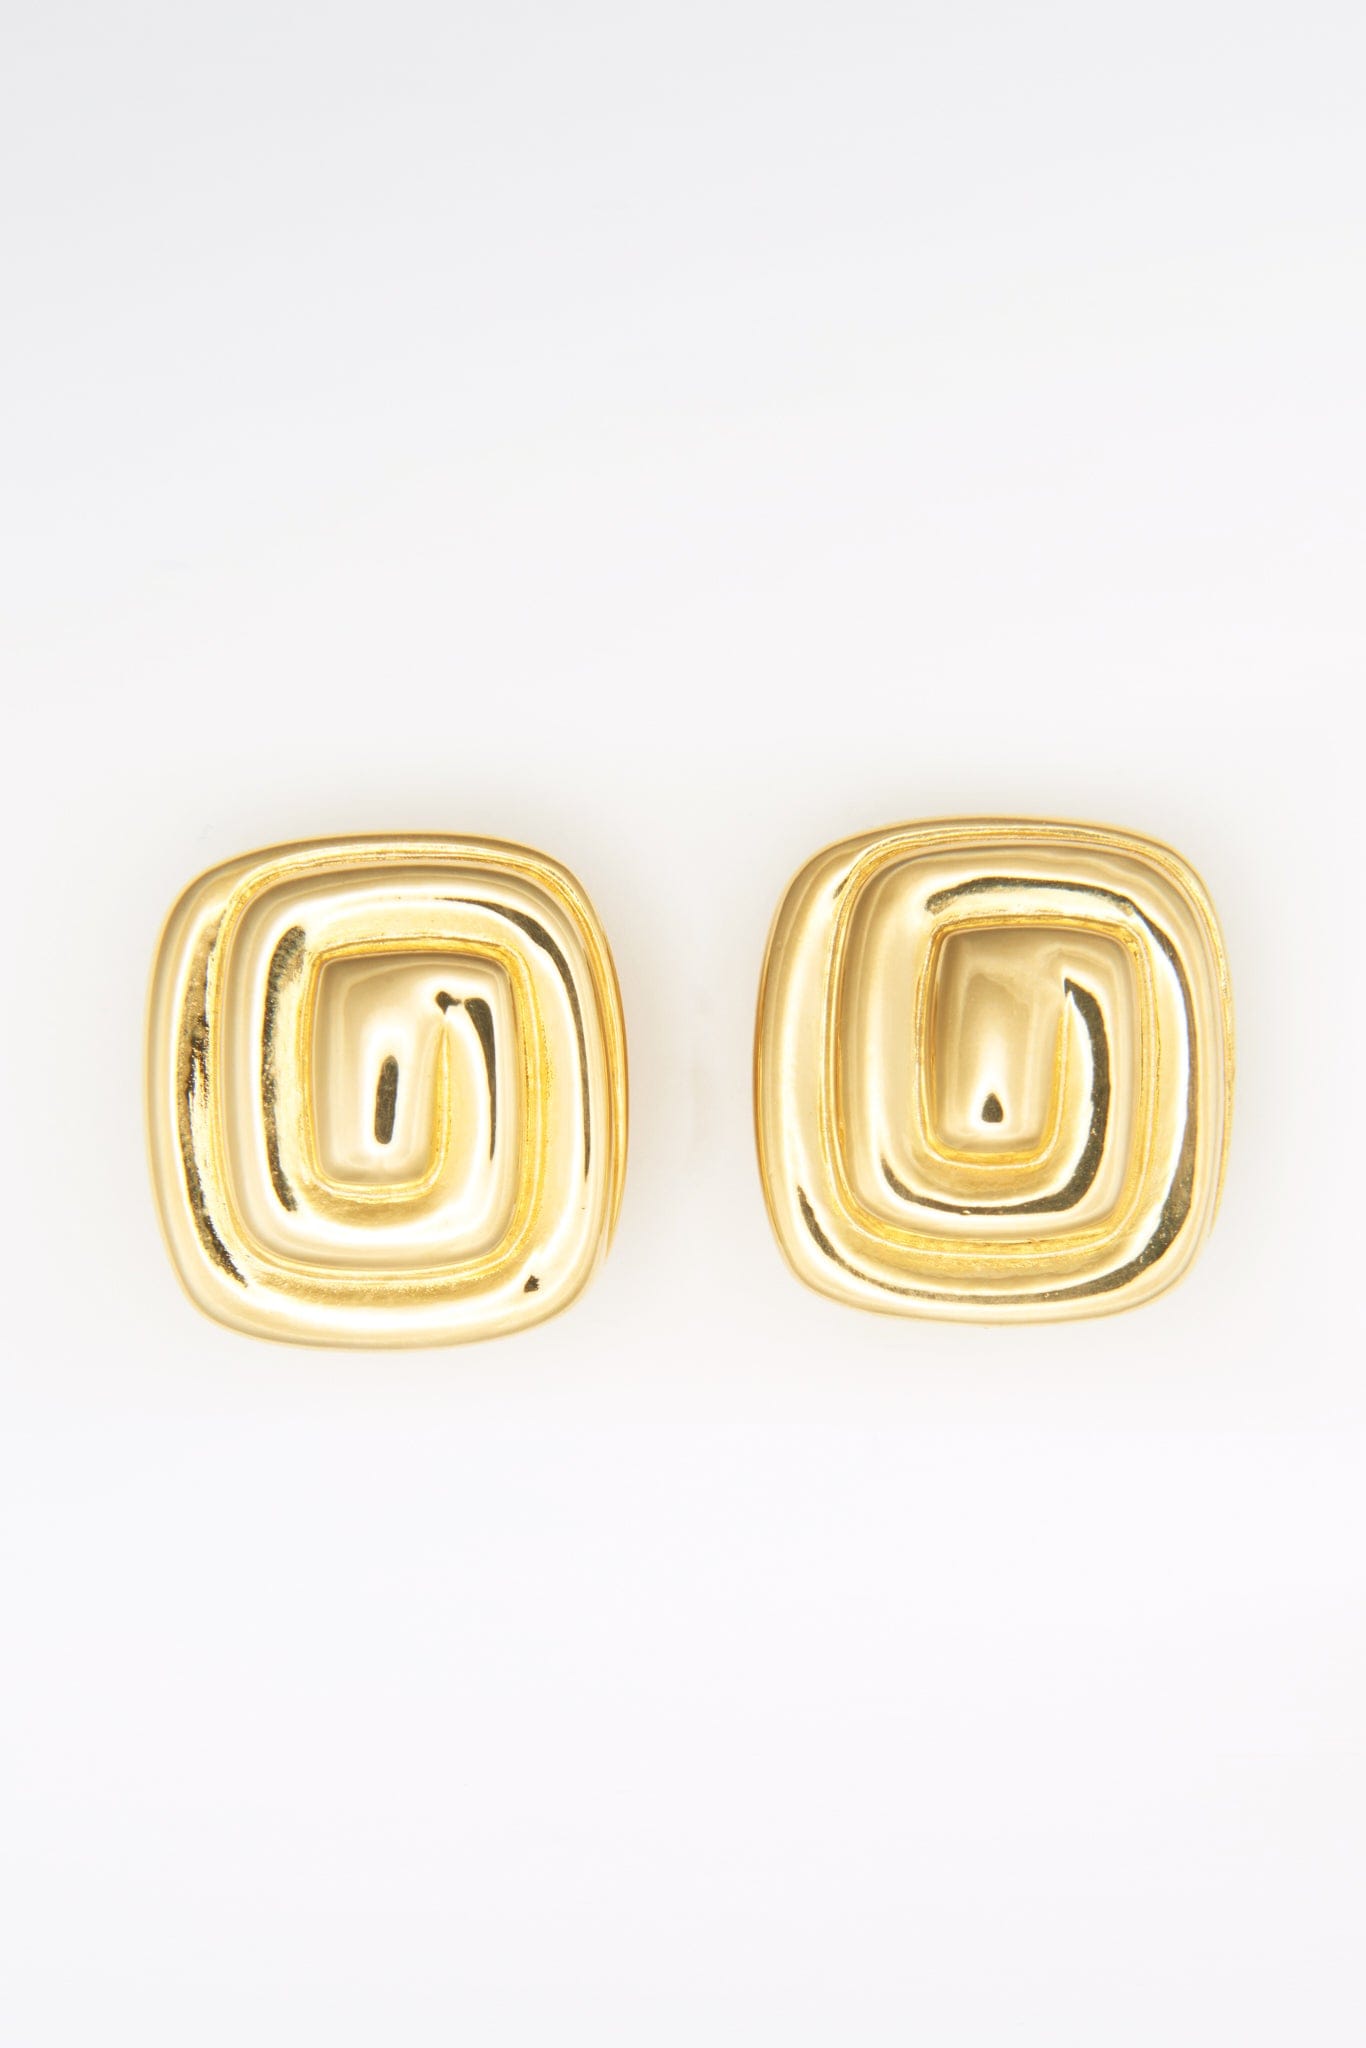 Vintage Gold Givenchy Earrings 1735